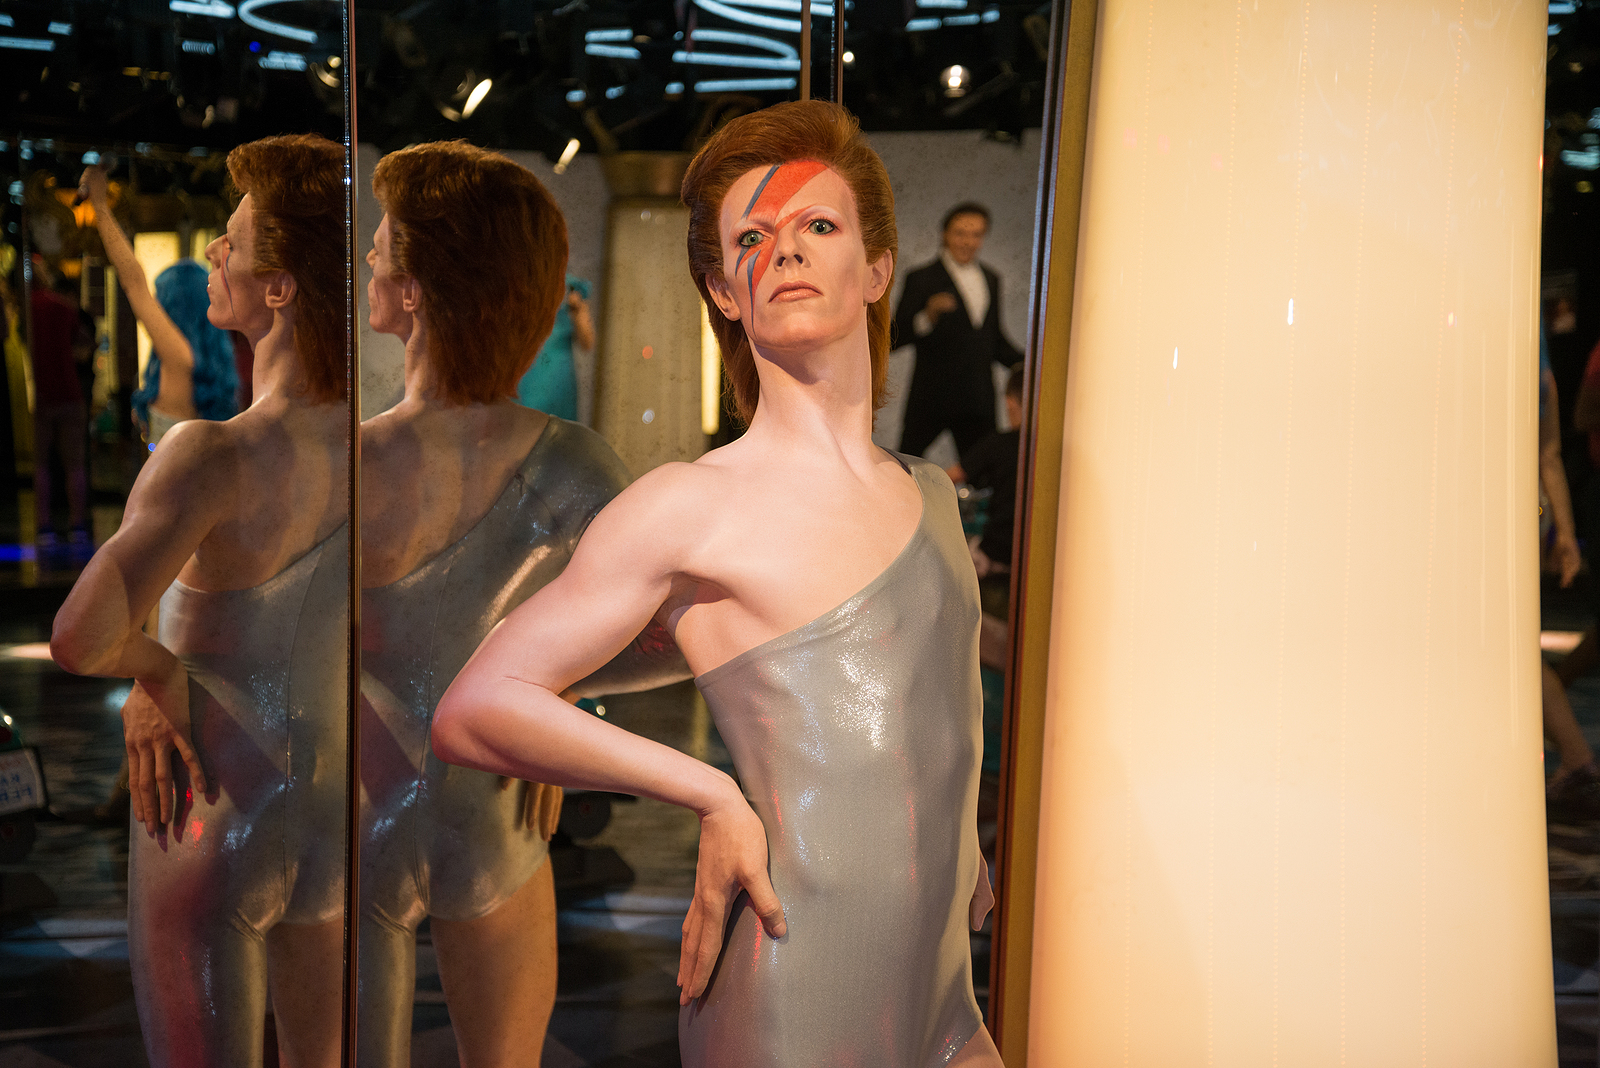 Ziggy Stardust wearing a shiny leotard standing in front of mirrors.